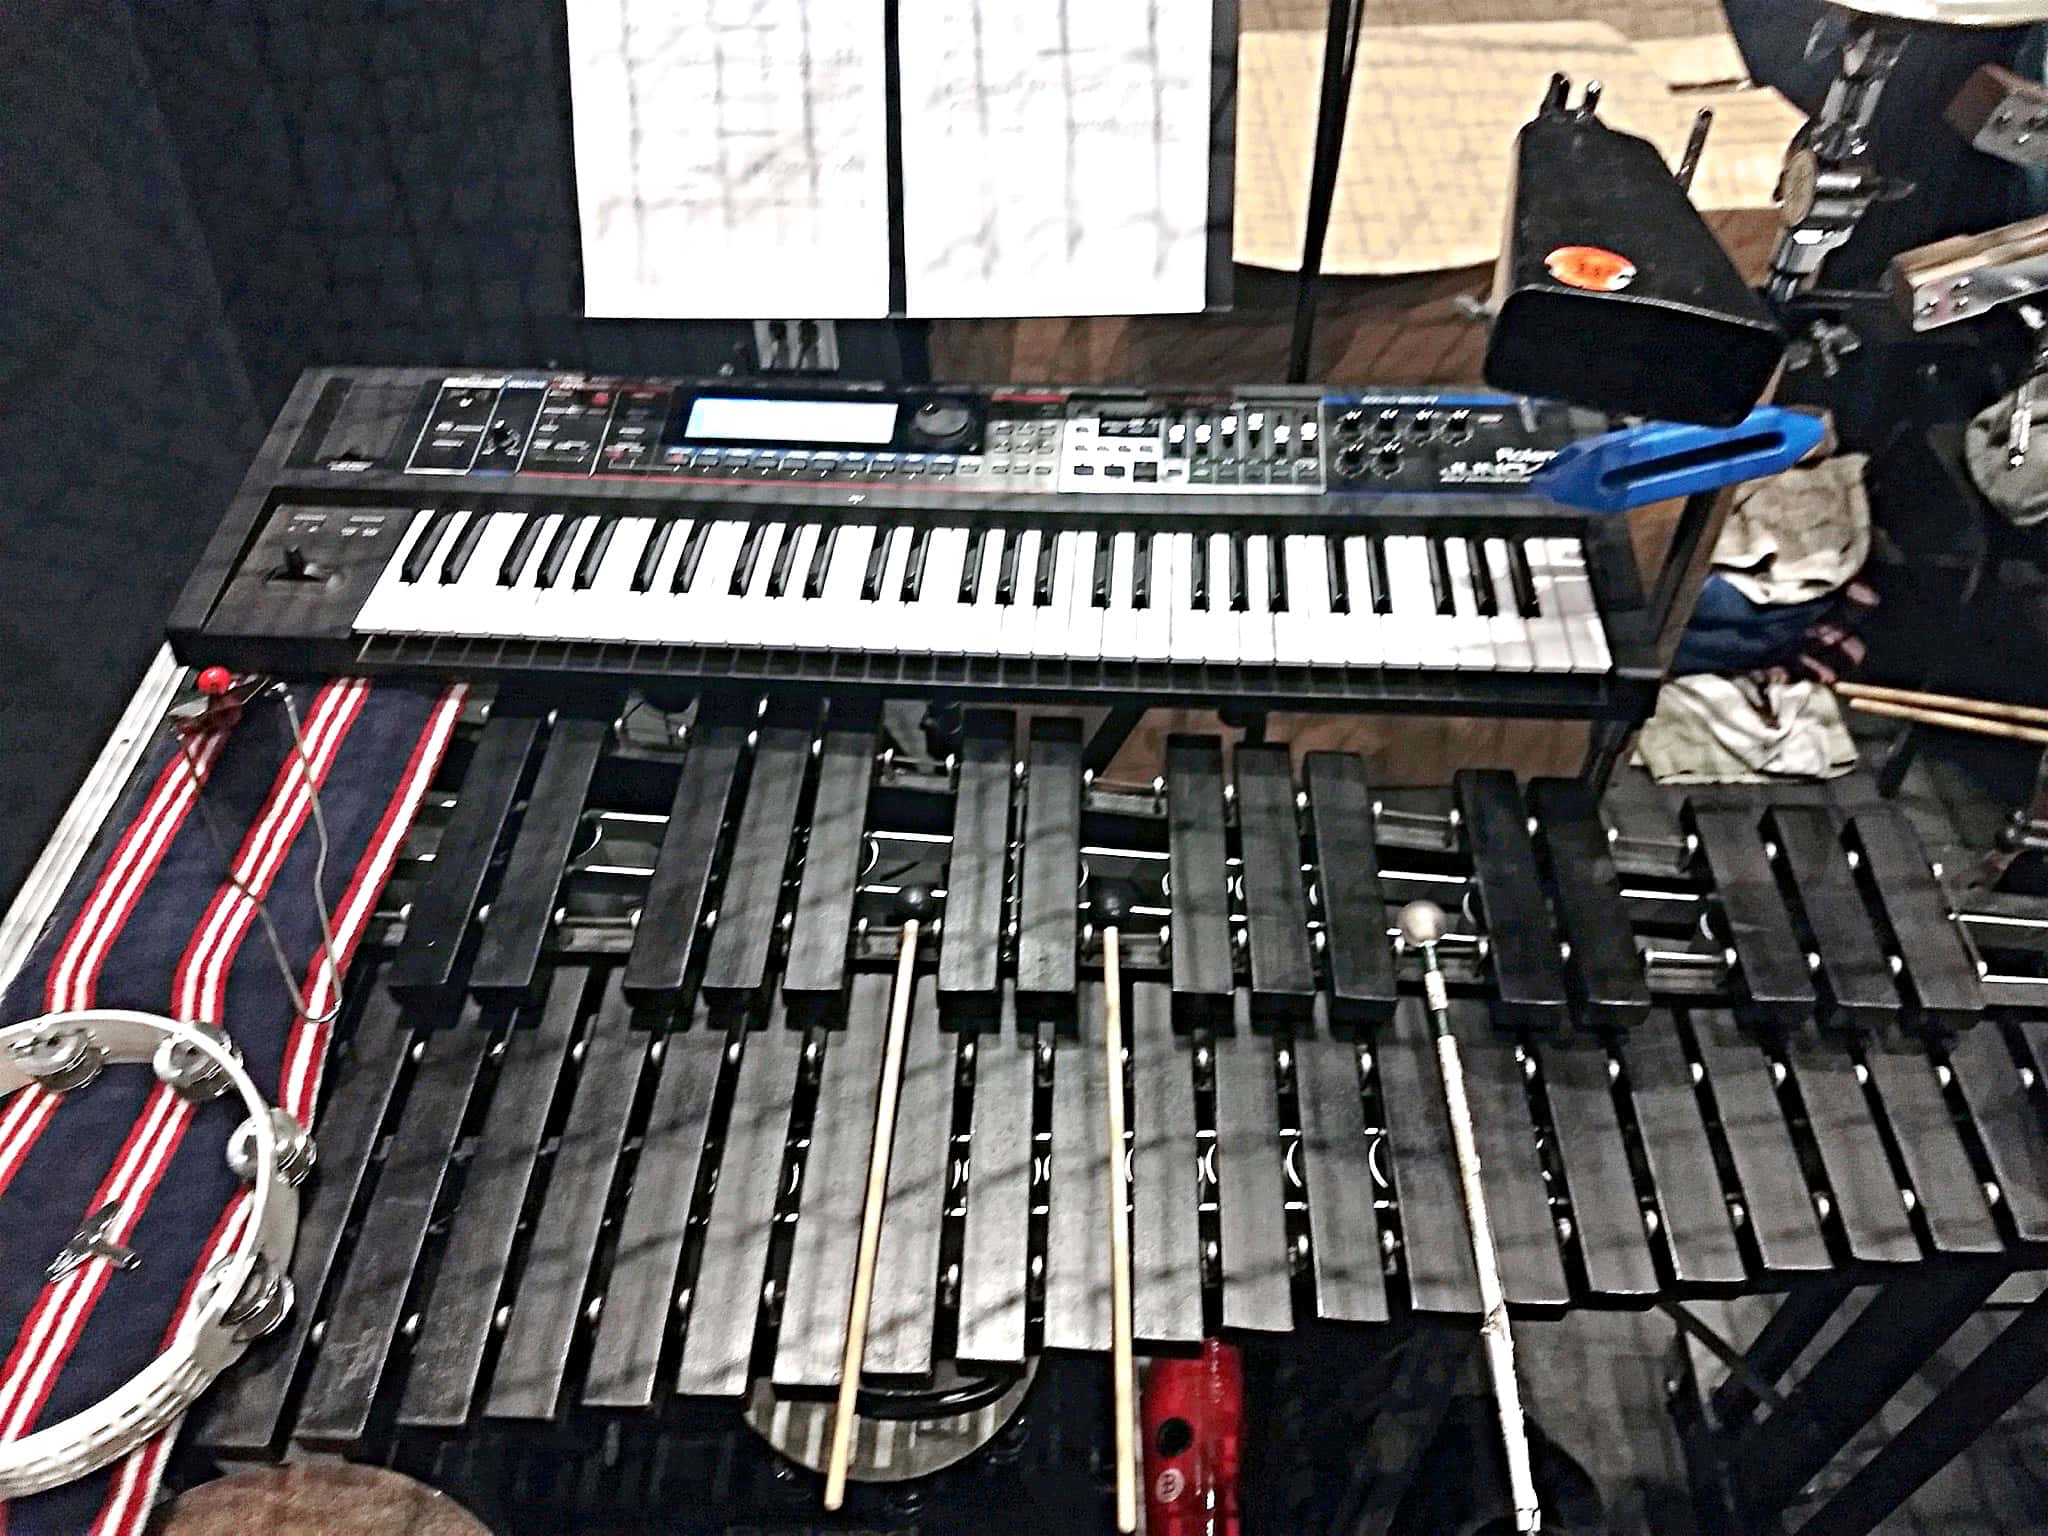 Rex Lycan’s percussion setup for The Little Mermaid at the Howard Brubeck Theatre in San Marcos, California.